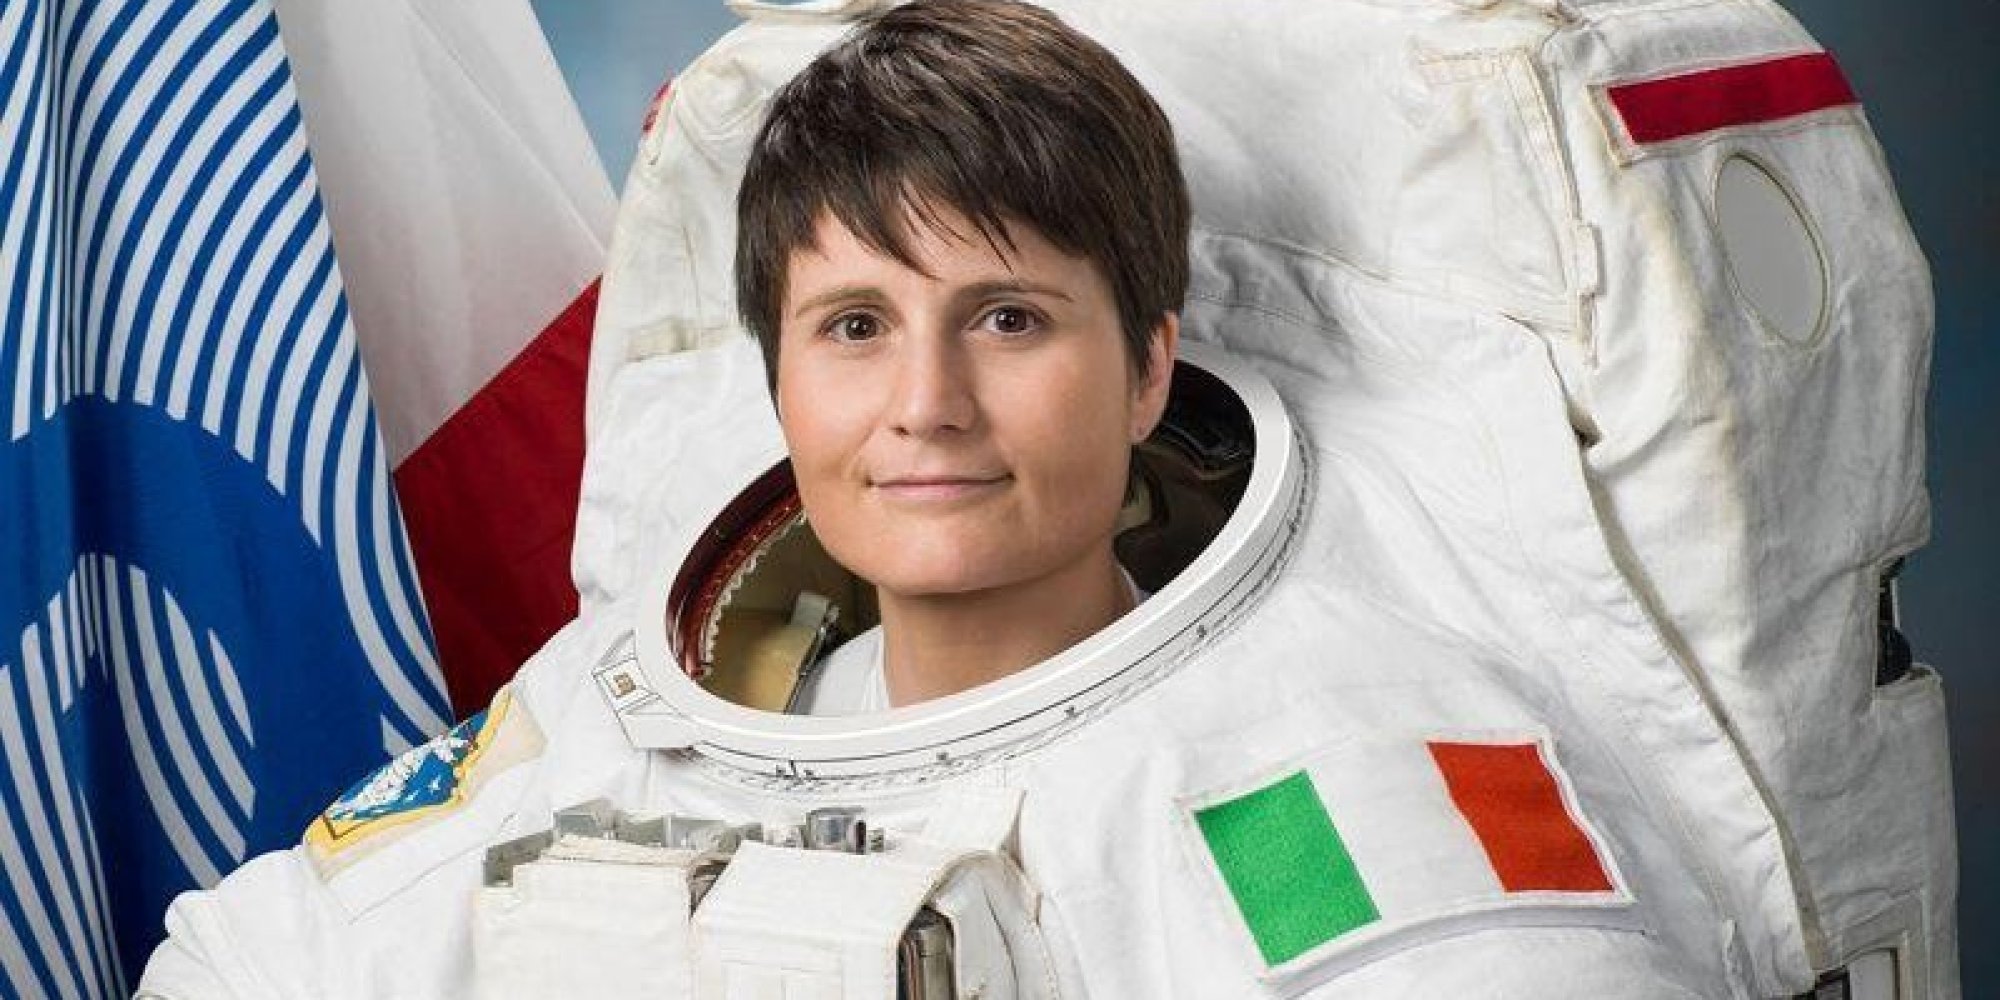 Say Hello To Italy's First Female Astronaut | HuffPost